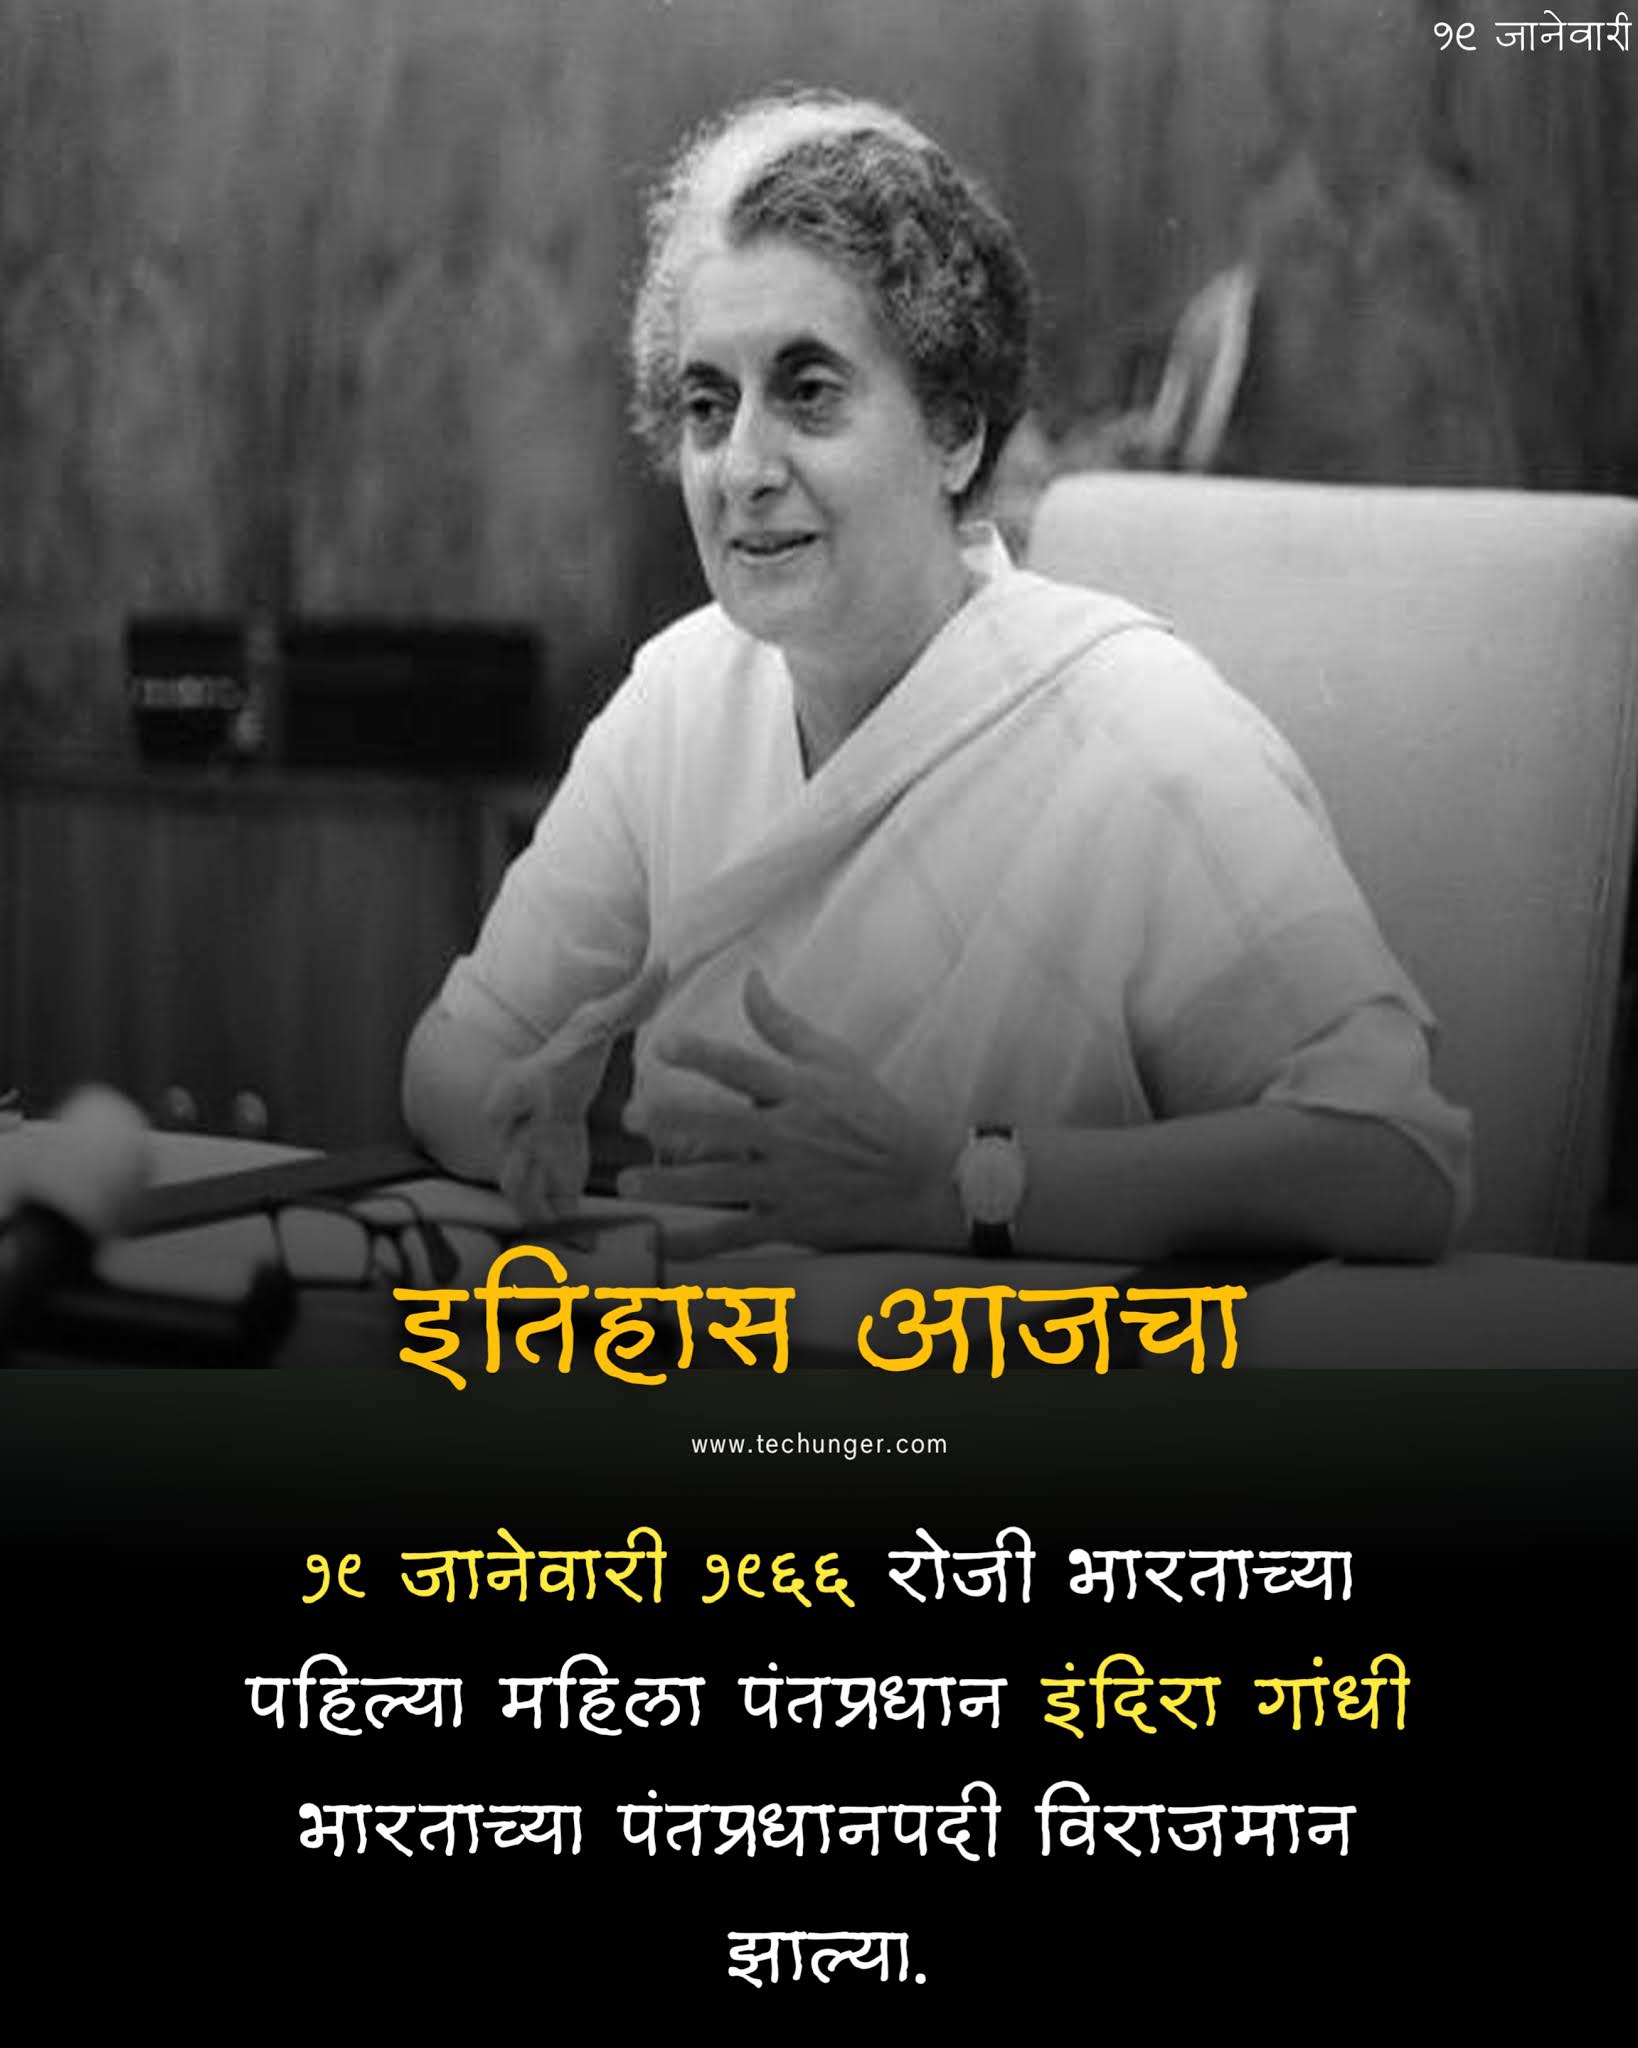 Indira Gandhi become a first female prime minister of India on 19 January